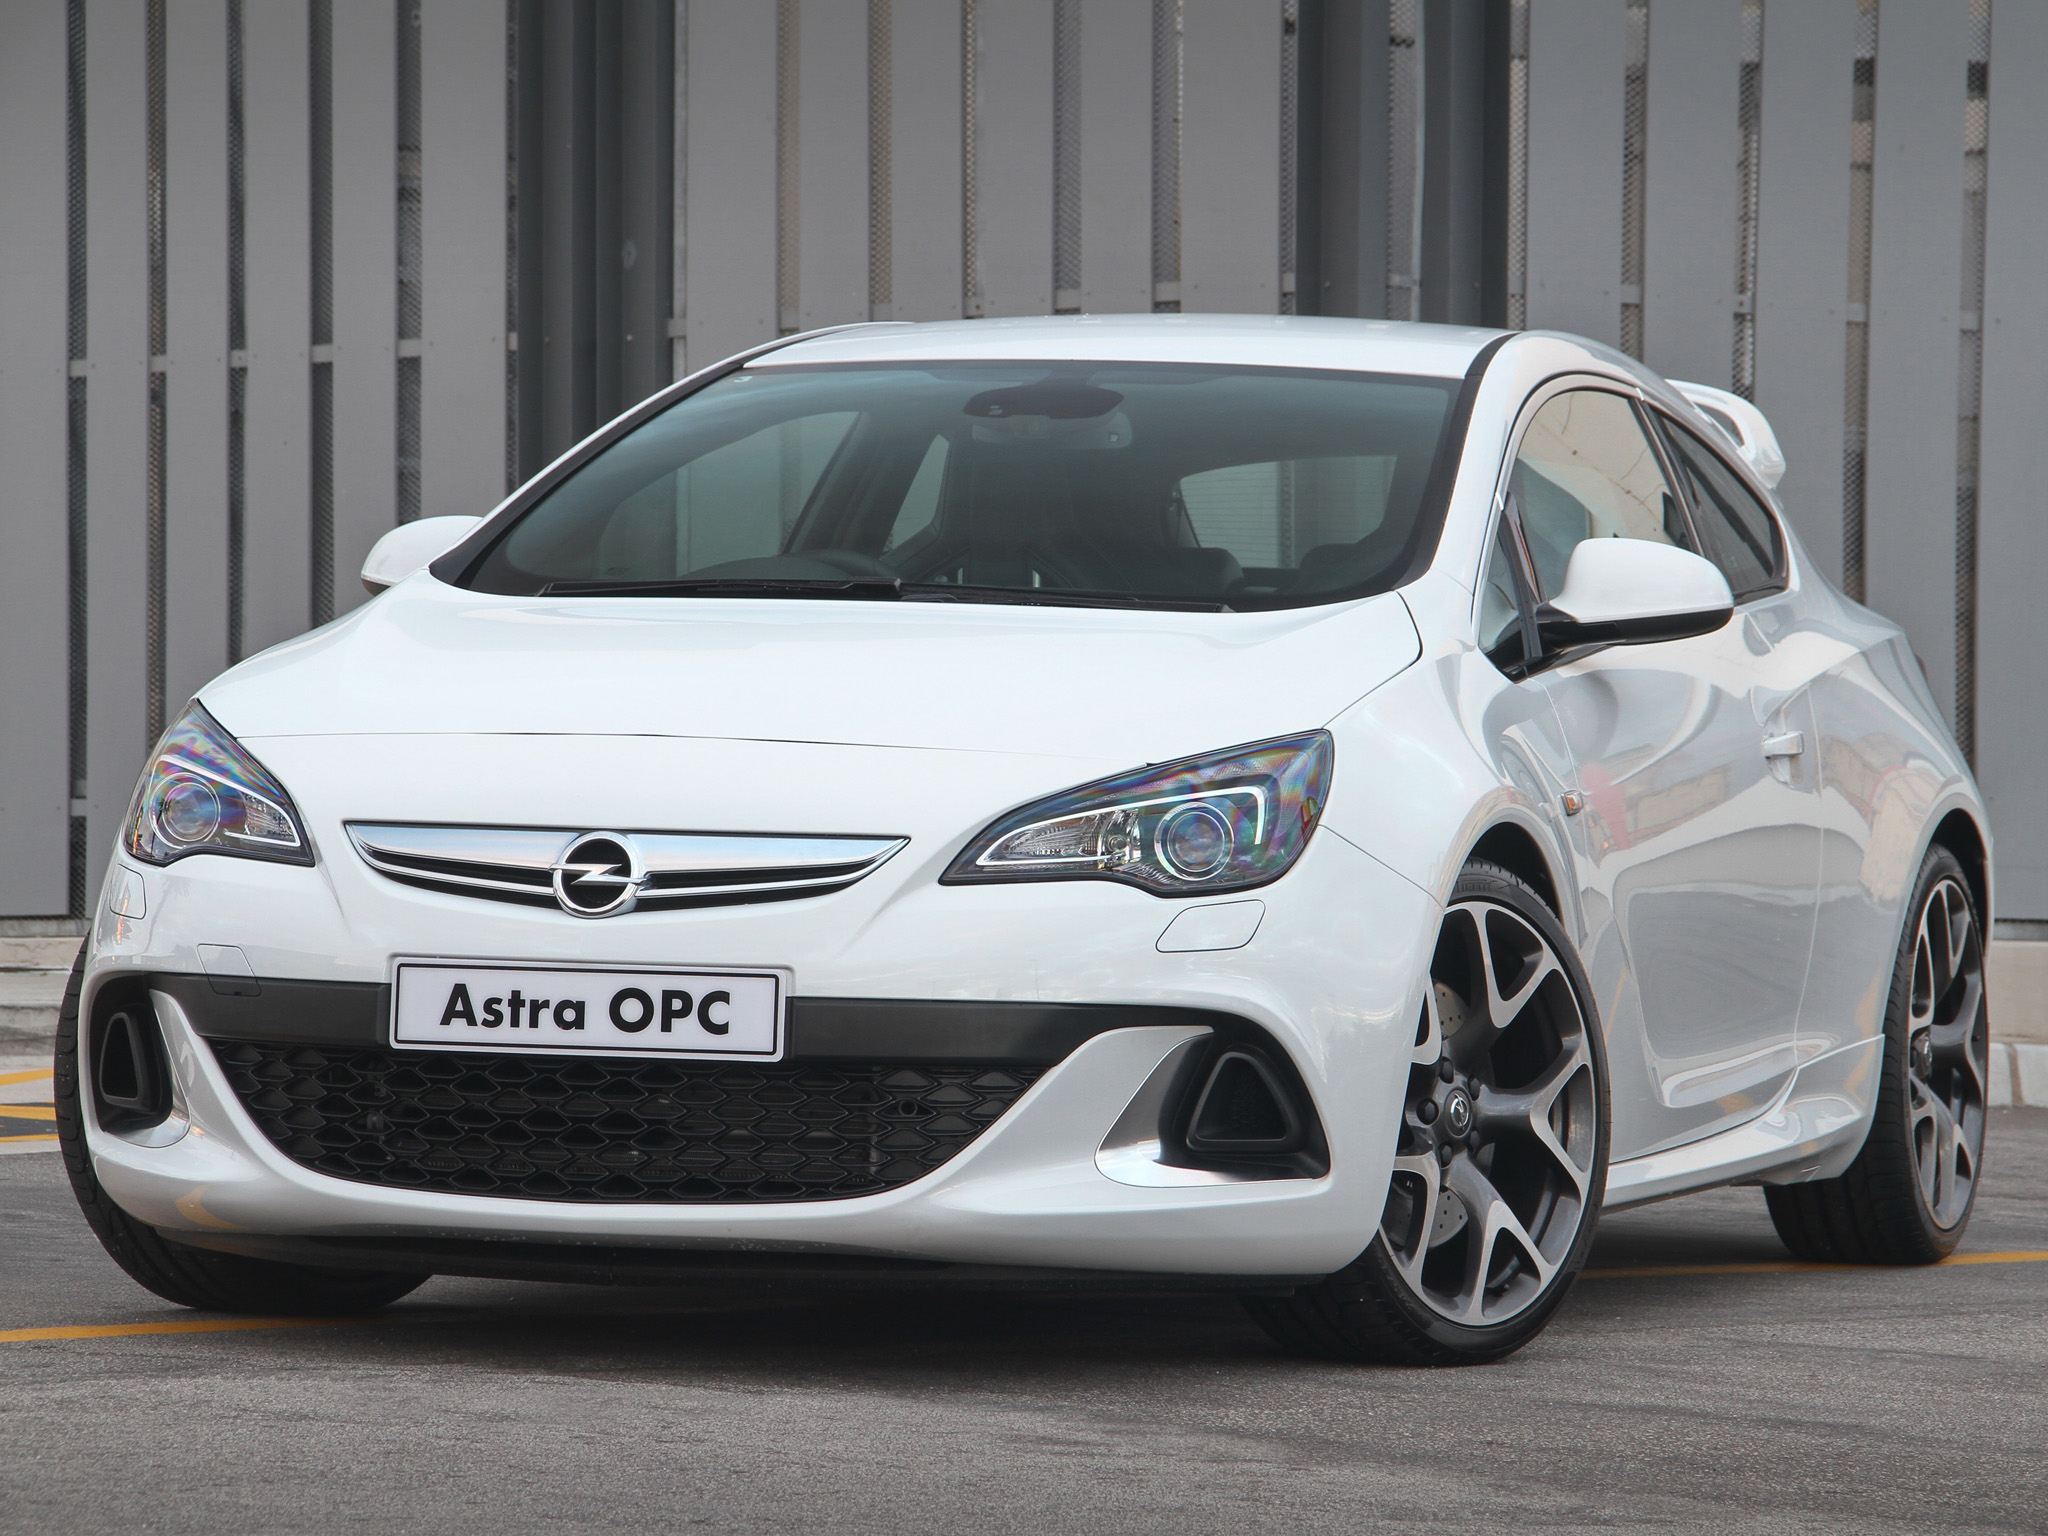 Opel Astra Opc Picture 9 Opel Photo Gallery Carsbase Com